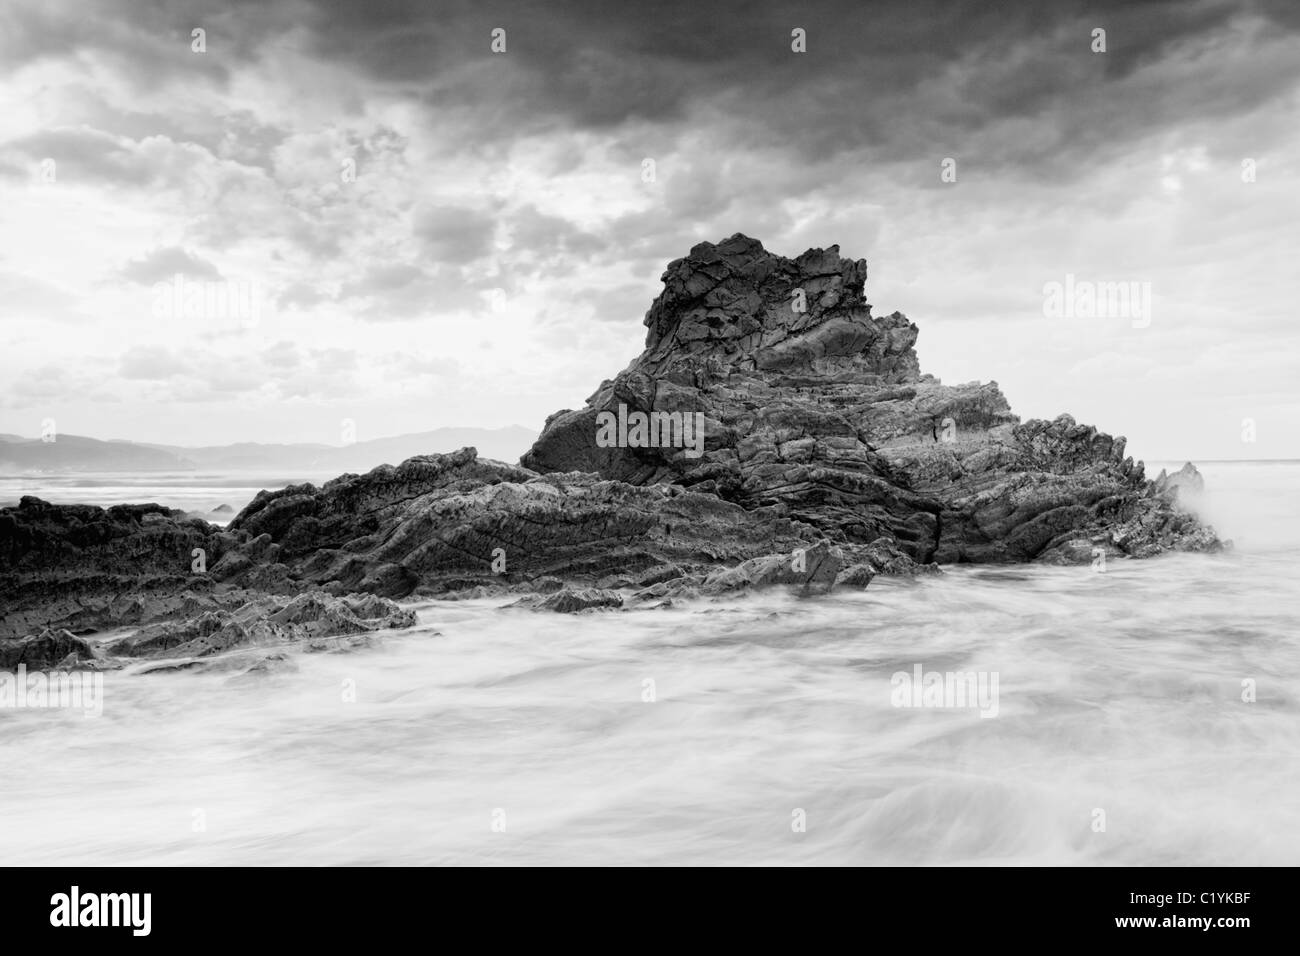 B&W seascape showing a rock on the coast with a cloudy stormy sky Stock Photo